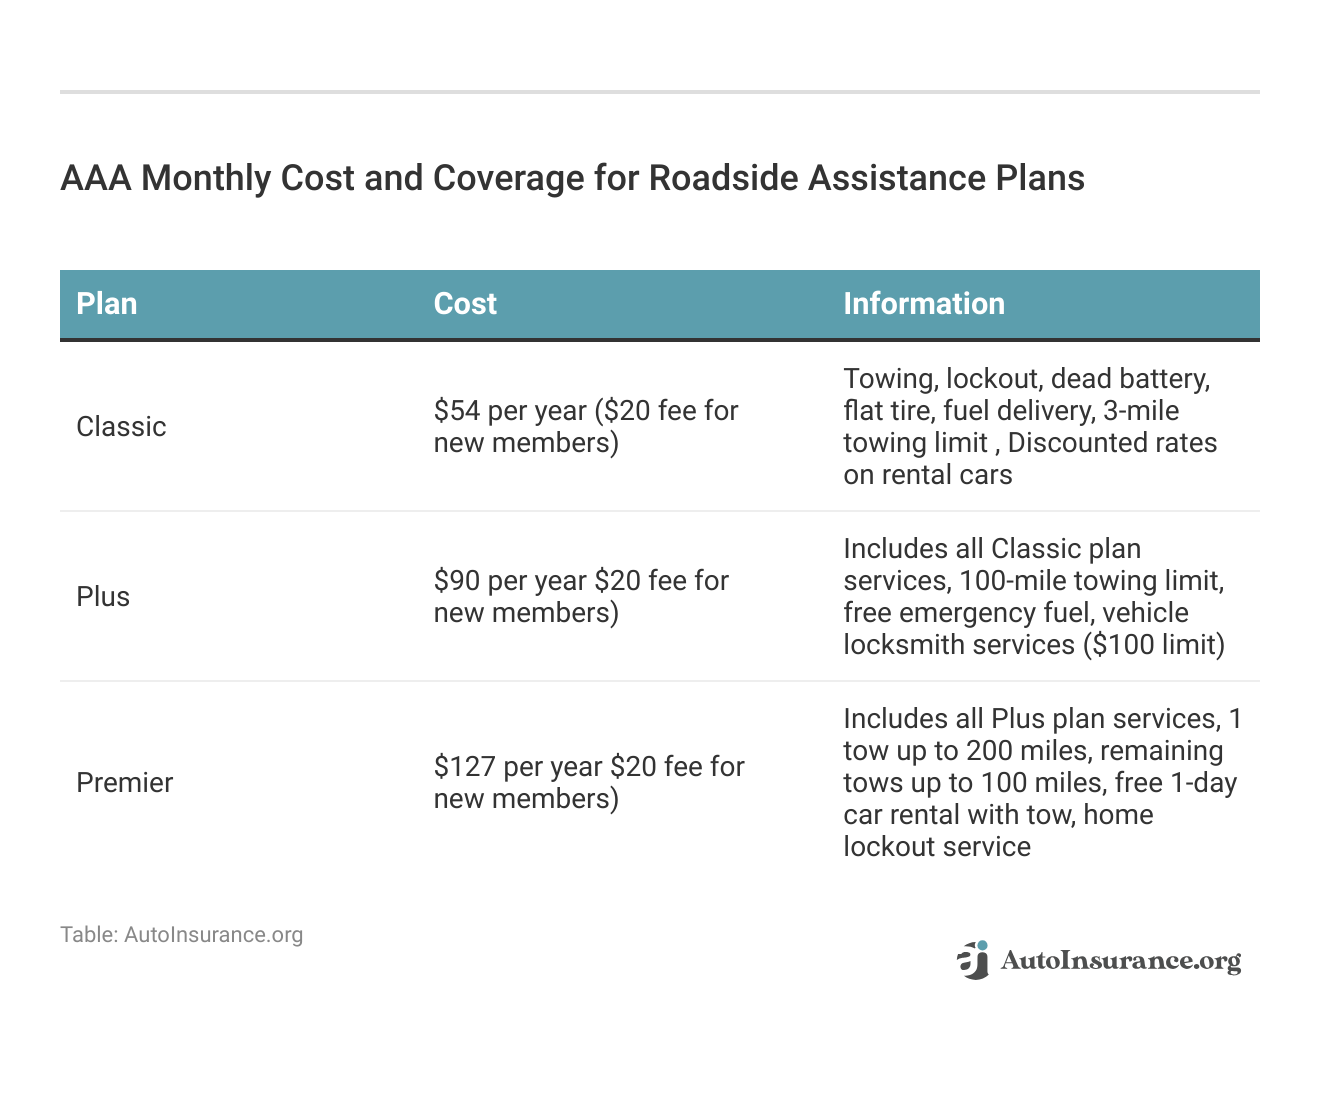 <h3>AAA Monthly Cost and Coverage for Roadside Assistance Plans<h3>